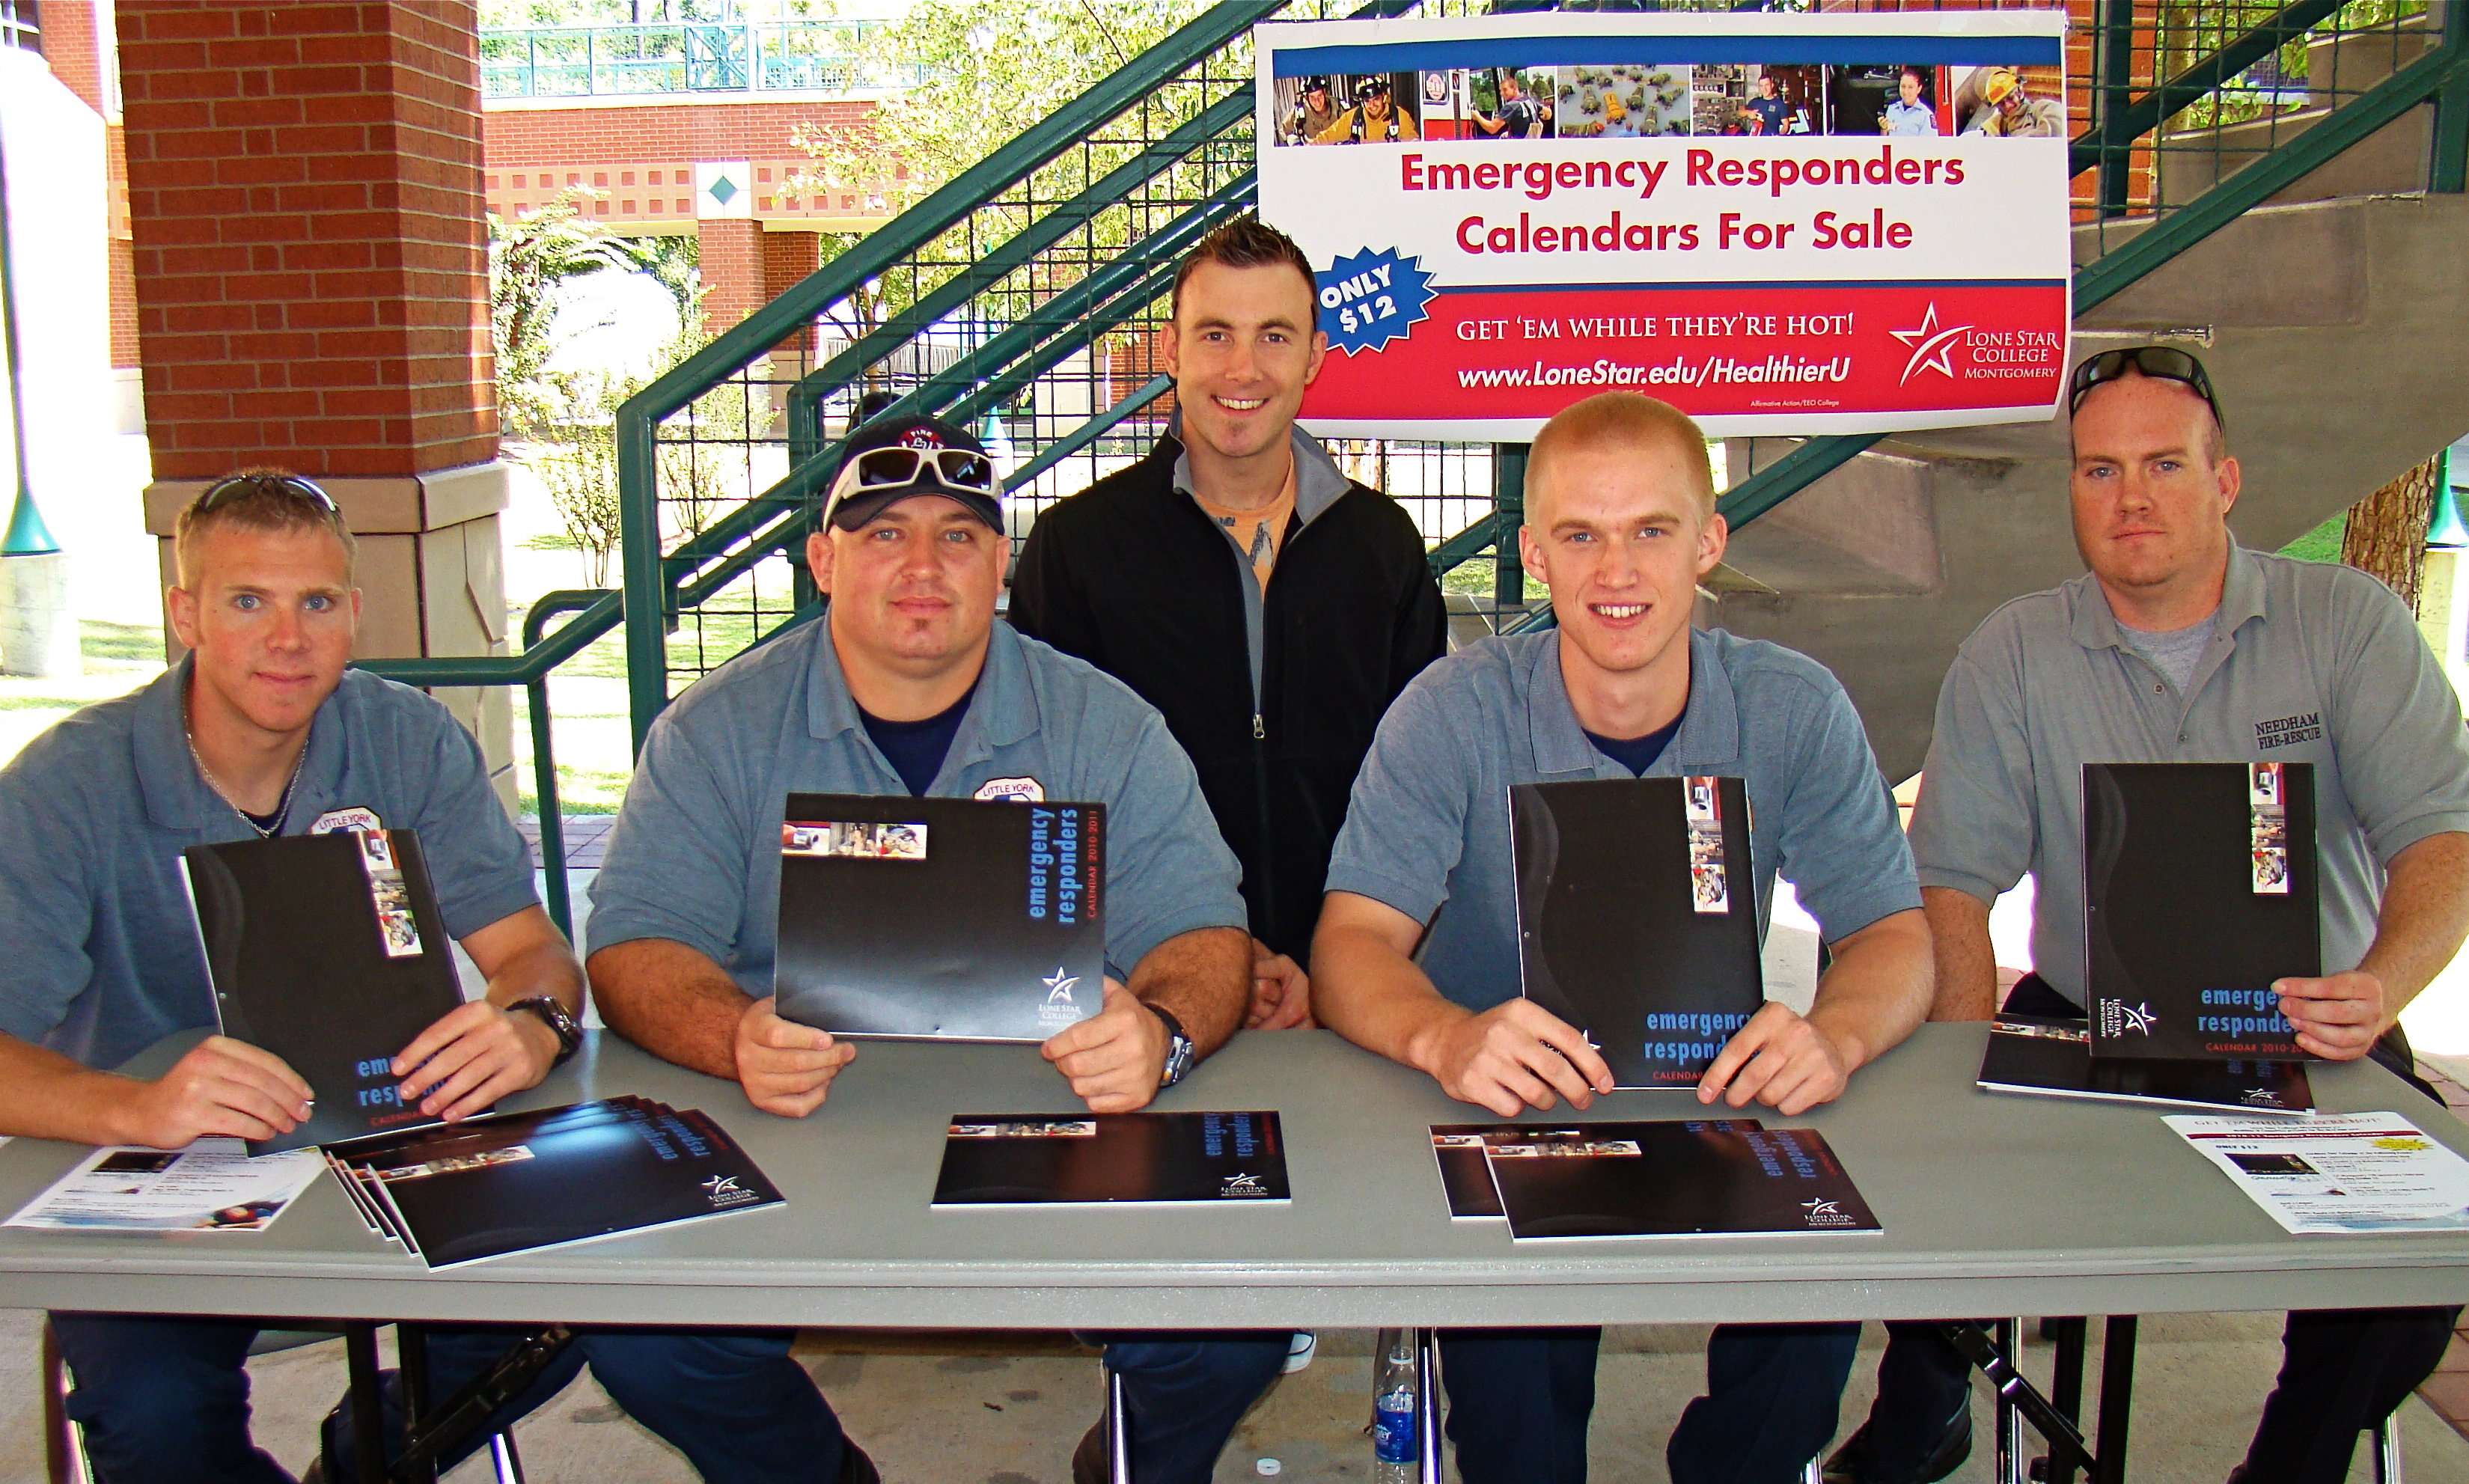 Recent Lone Star College-Montgomery fire science academy graduates Justin Jones, Matt Gonzales, John Breaux, Ross Havlick, and Patrick Dorsey help sell the 2010-2011 Emergency Responder Calendars, a 16-month calendar featuring former fire science students. Proceeds from the calendar provide scholarships for students at the college.